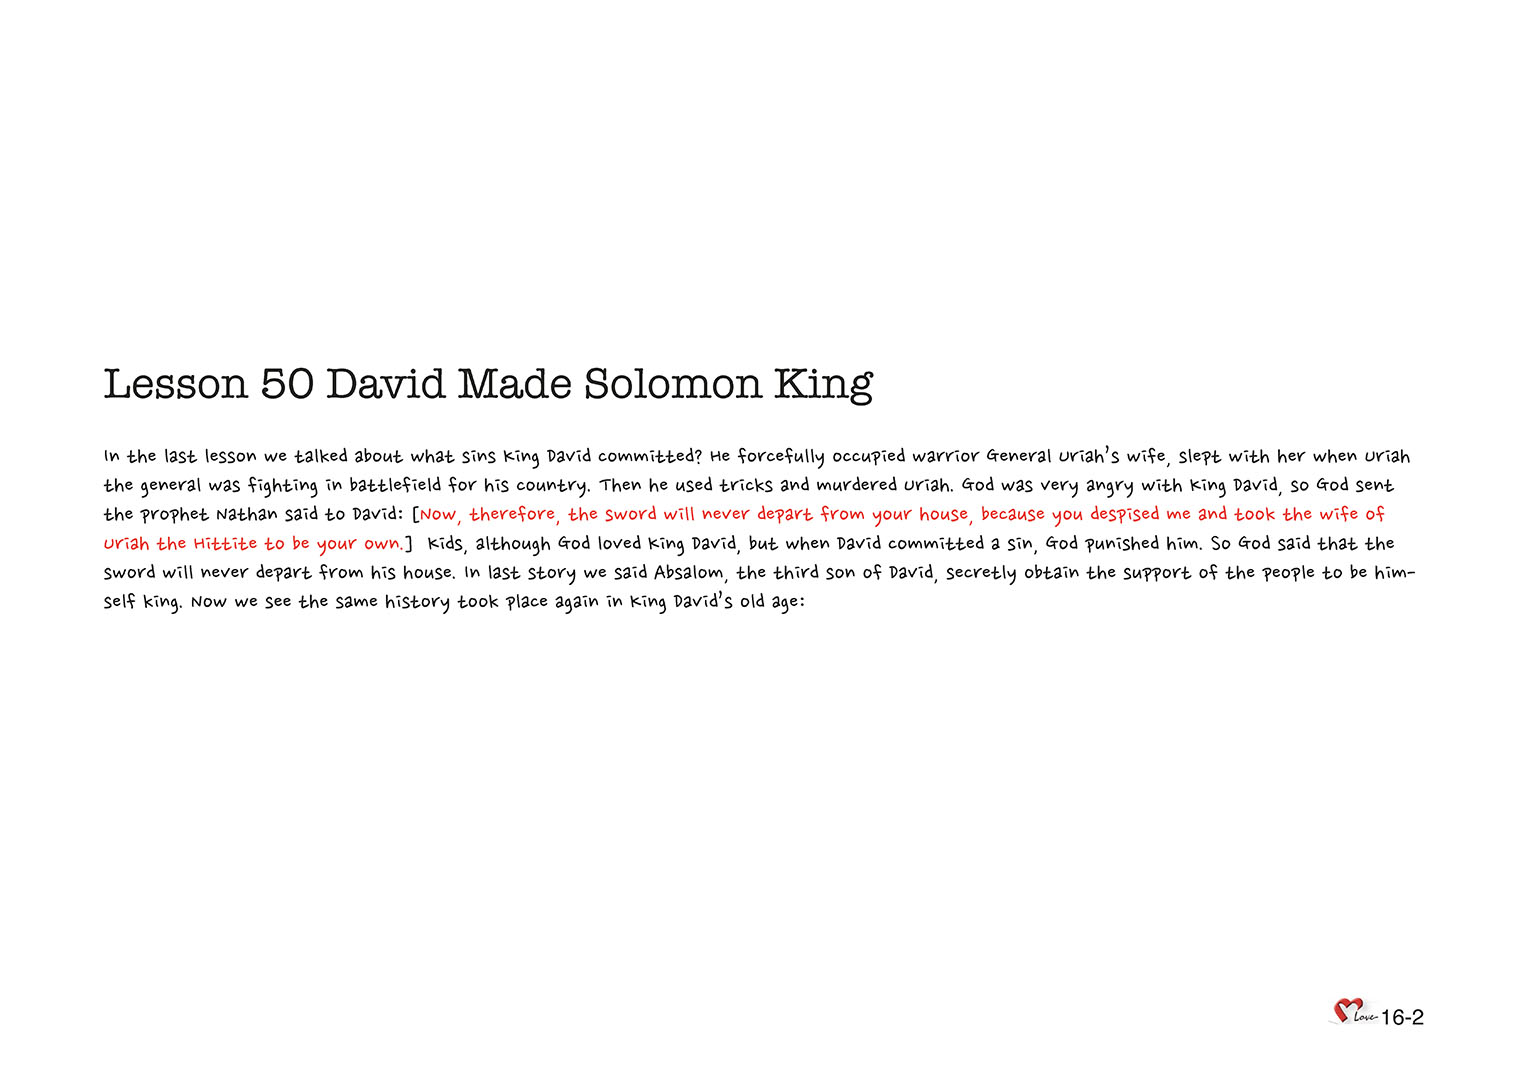 Chapter 16 - Lesson 50 - David Made Solomon King